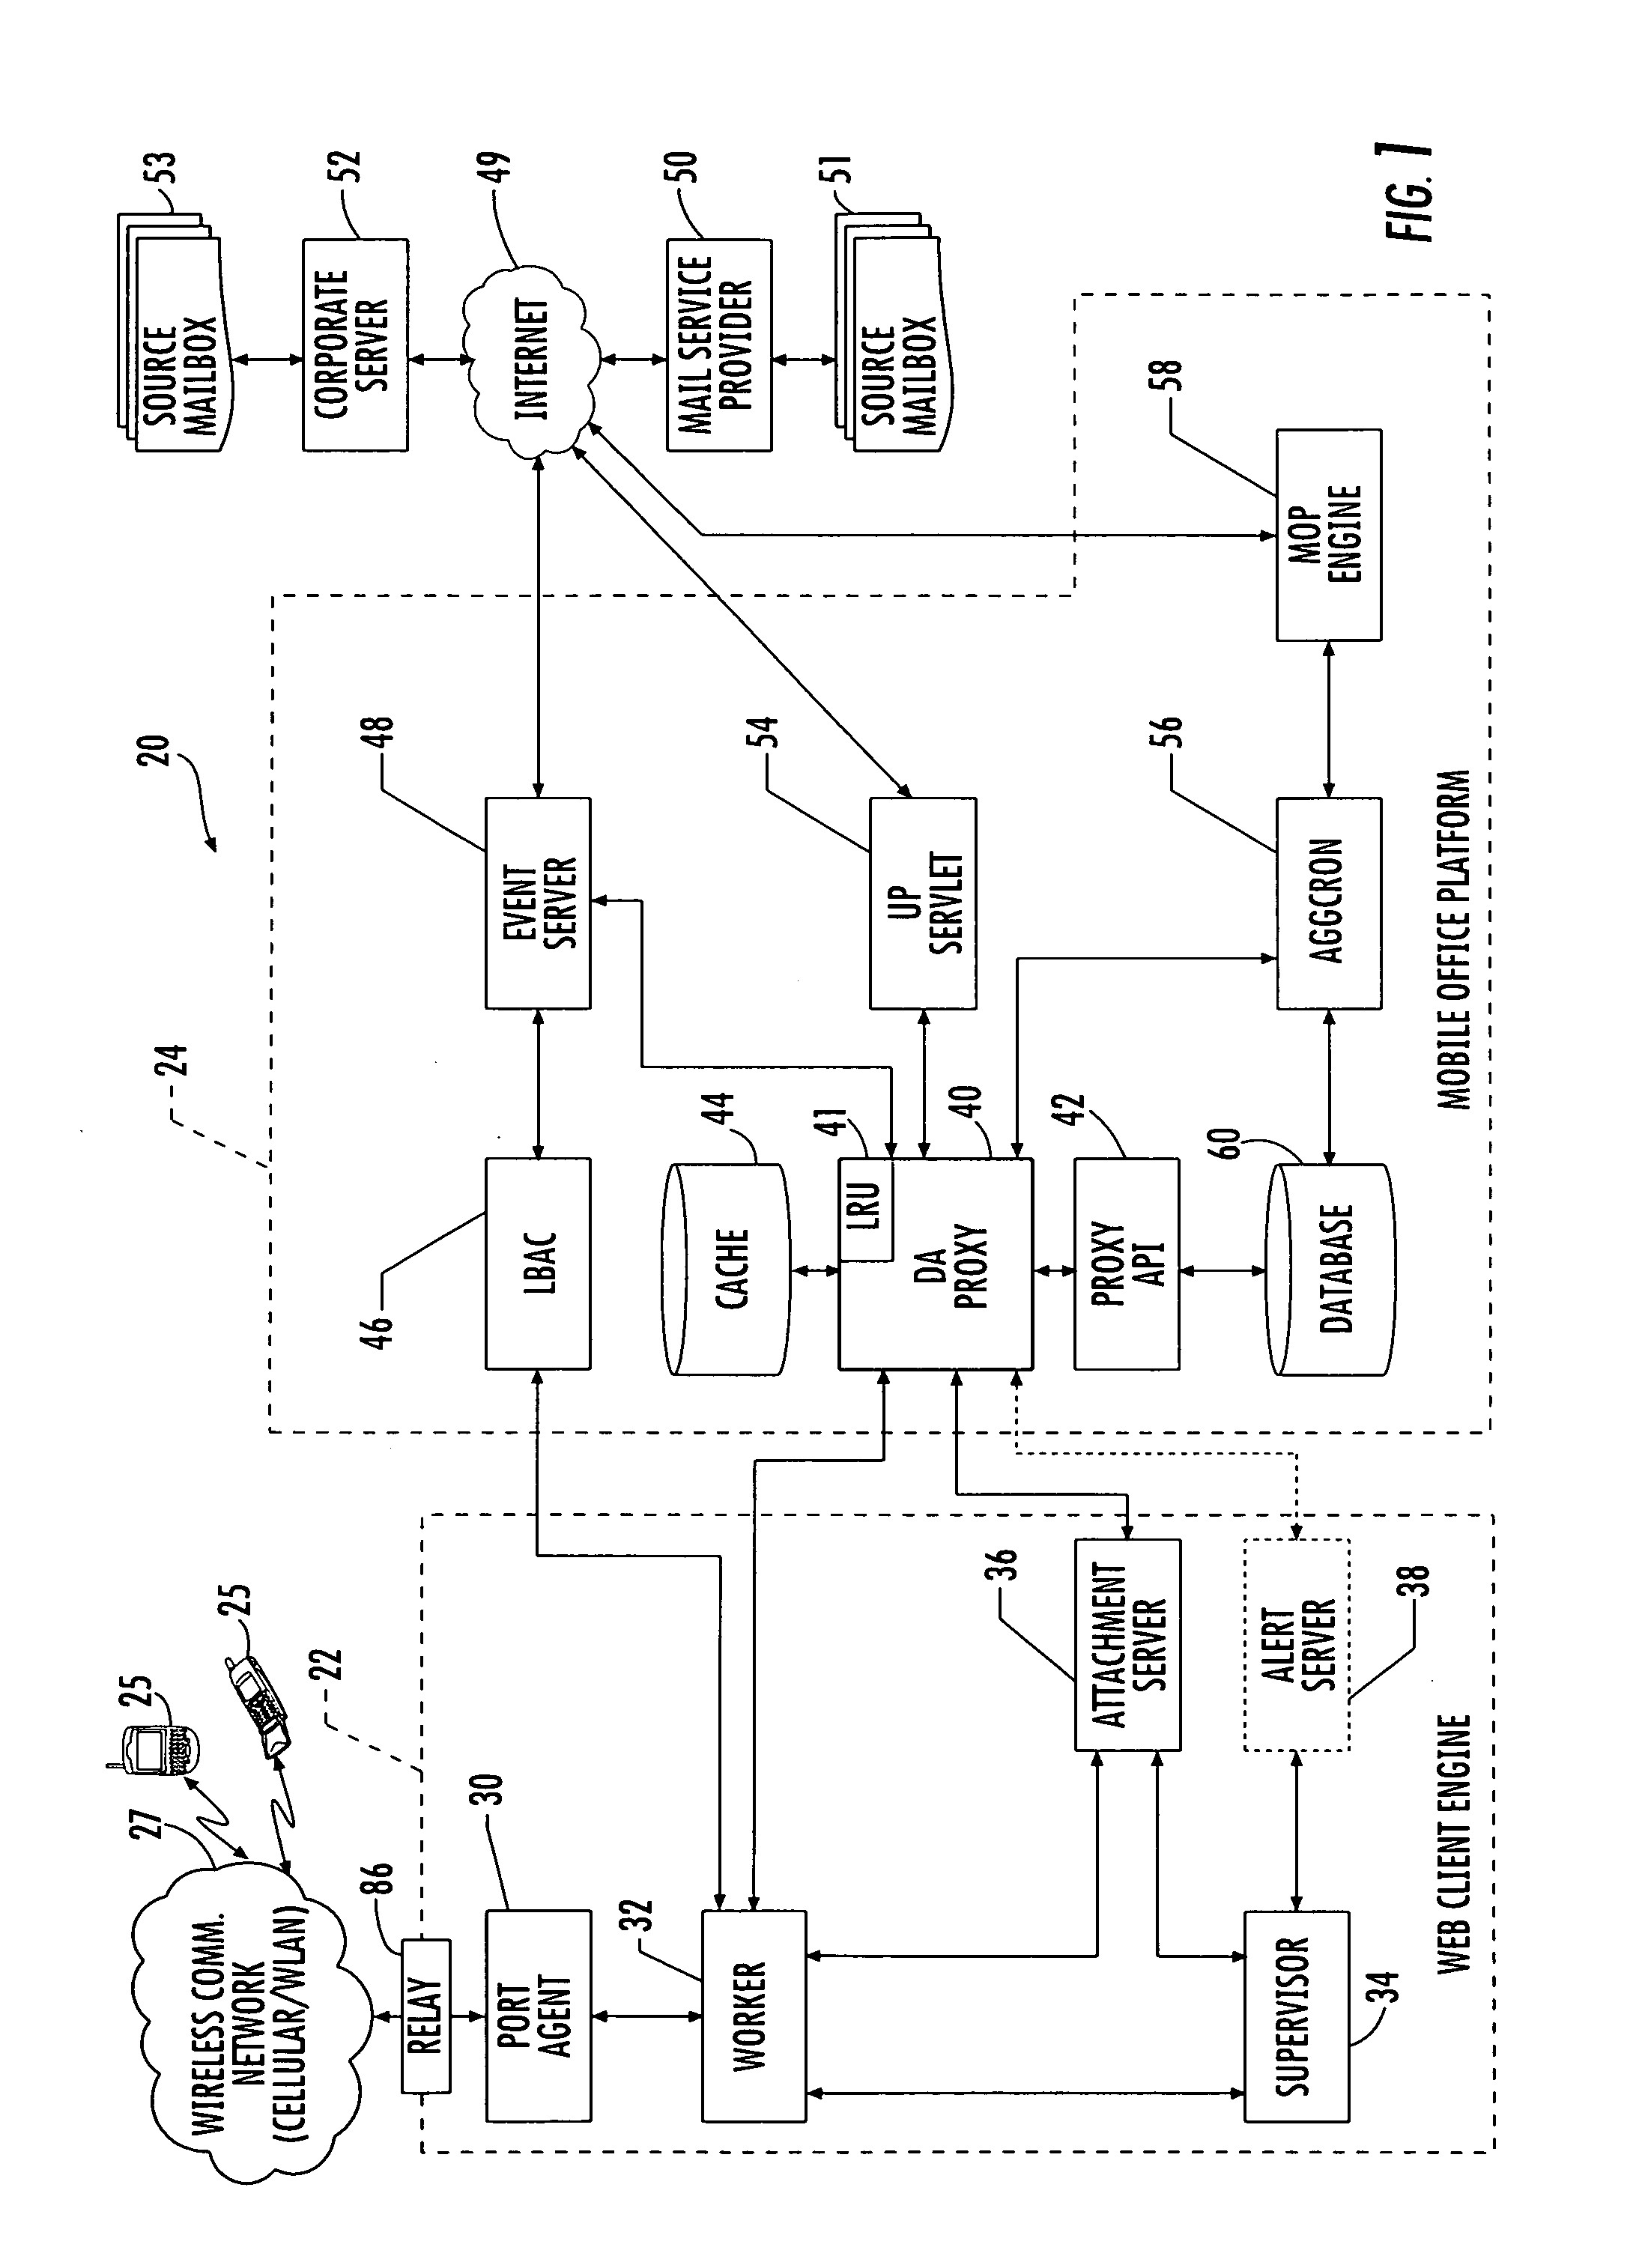 System and method for rendering presentation pages based on locality